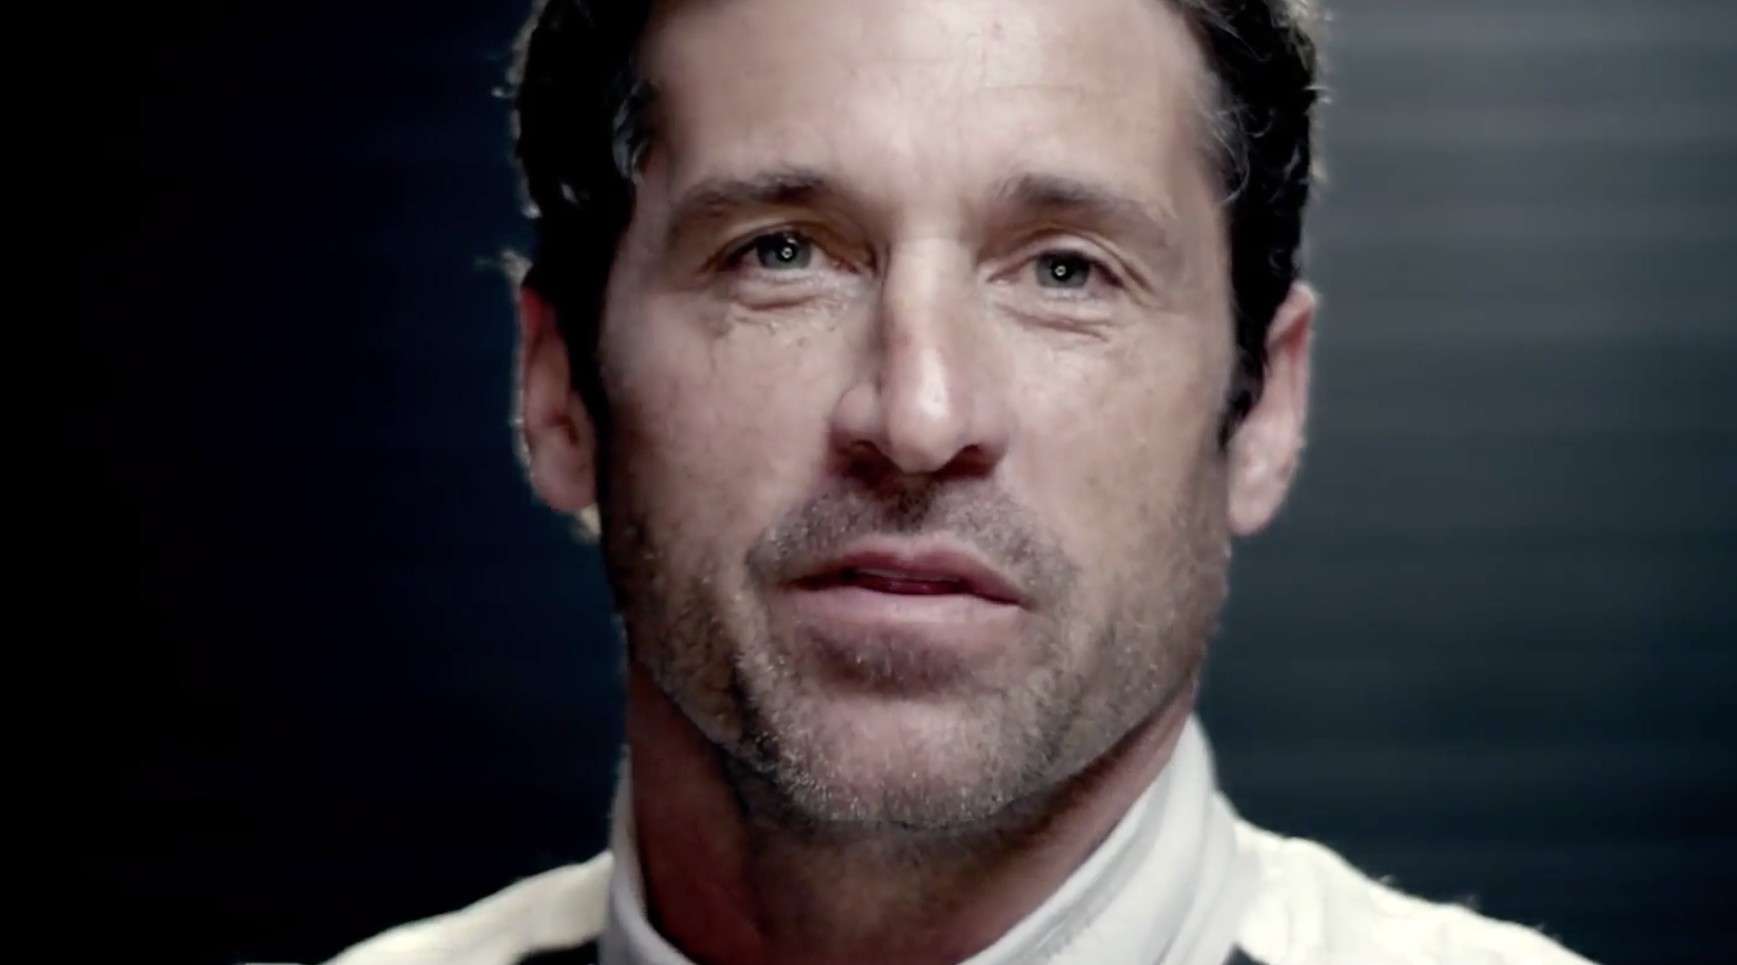 Porsche 保时捷 - Patrick Dempsey You are what you fight for